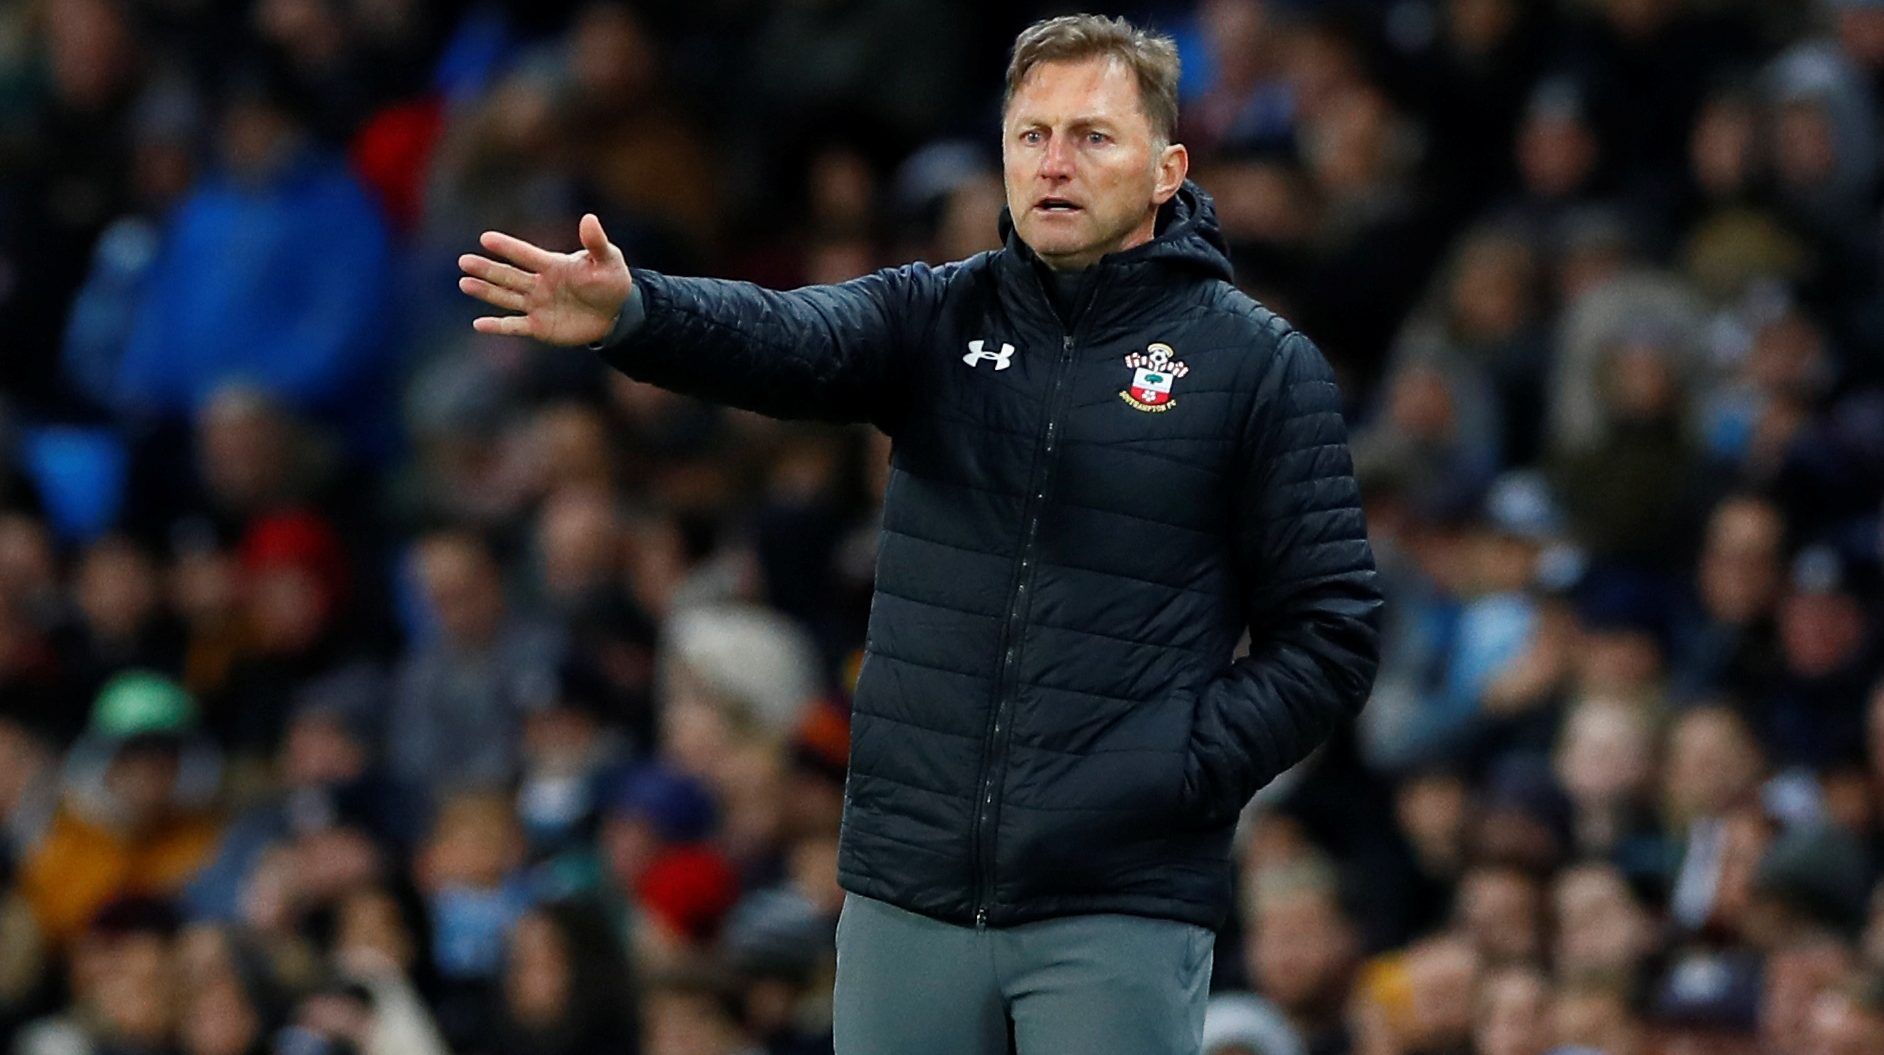 Soccer Football - Carabao Cup - Fourth Round - Manchester City v Southampton - Etihad Stadium, Manchester, Britain - October 29, 2019  Southampton manager Ralph Hasenhuttl             Action Images via Reuters/Jason Cairnduff  EDITORIAL USE ONLY. No use with unauthorized audio, video, data, fixture lists, club/league logos or 